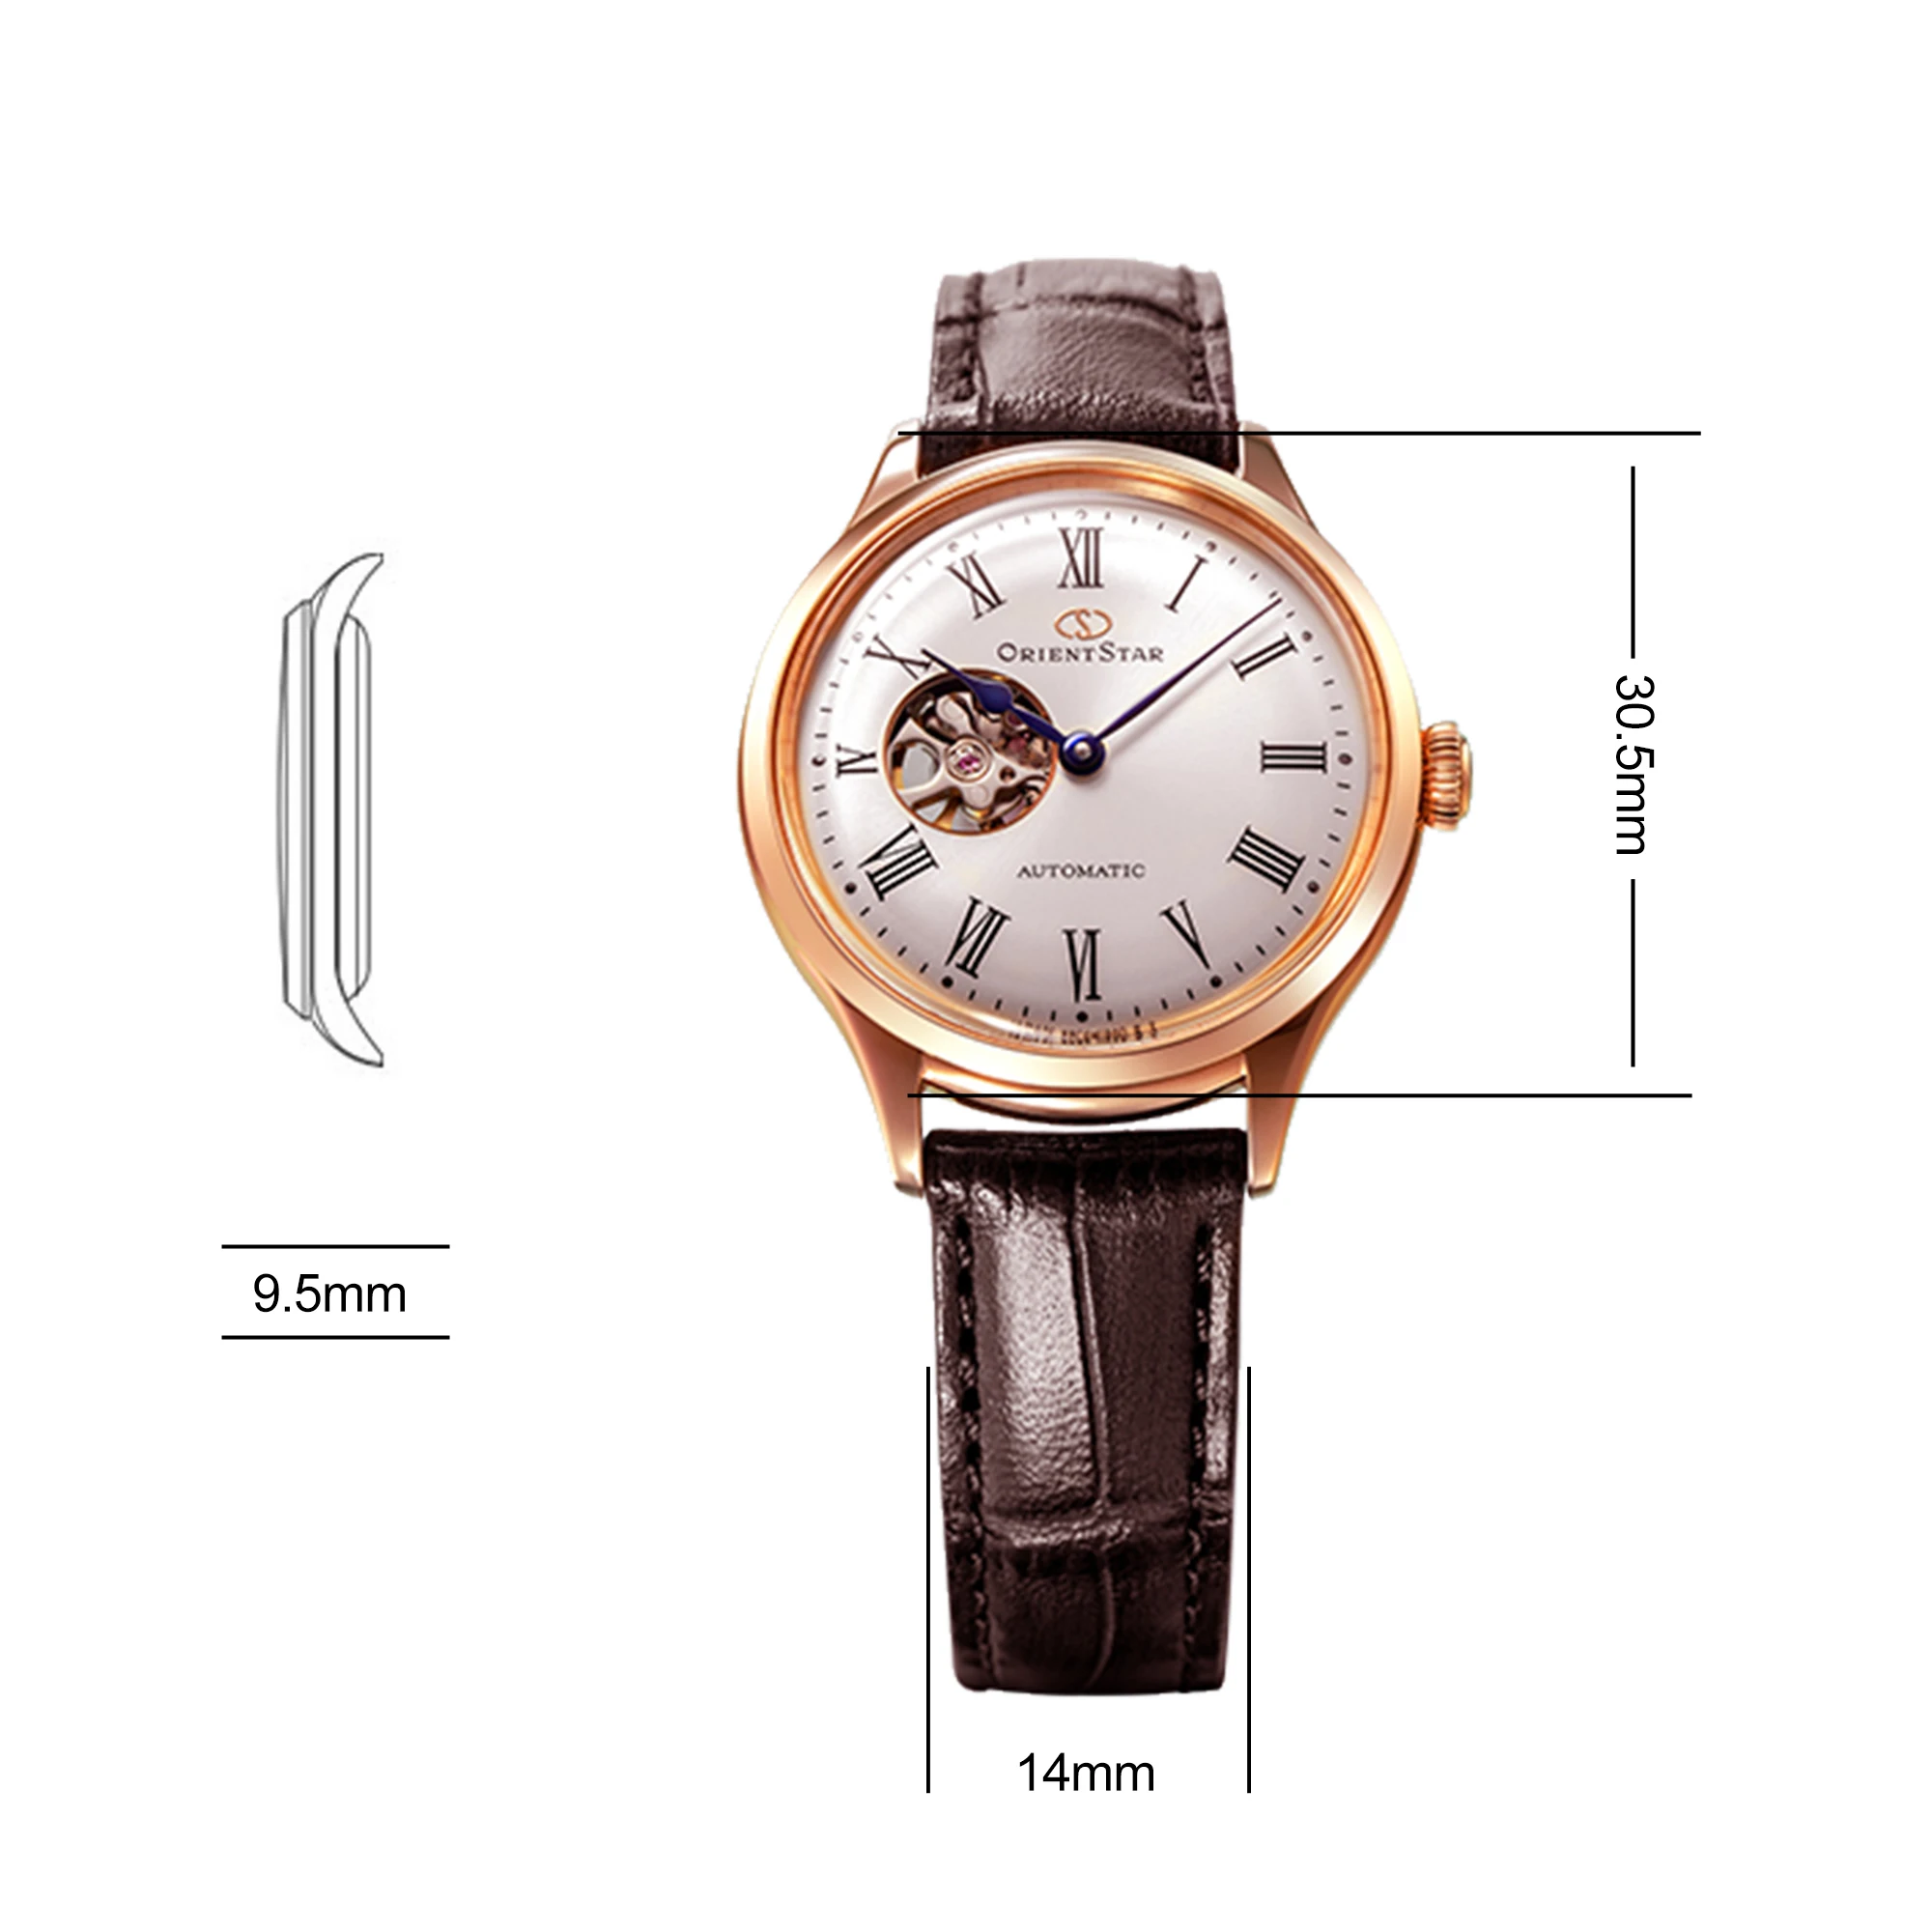 Original Orient Star Automatic Watch for Women, Japanese Dress Wrist Watch See-through Case Back Semi Skeleton Champagne enlarge